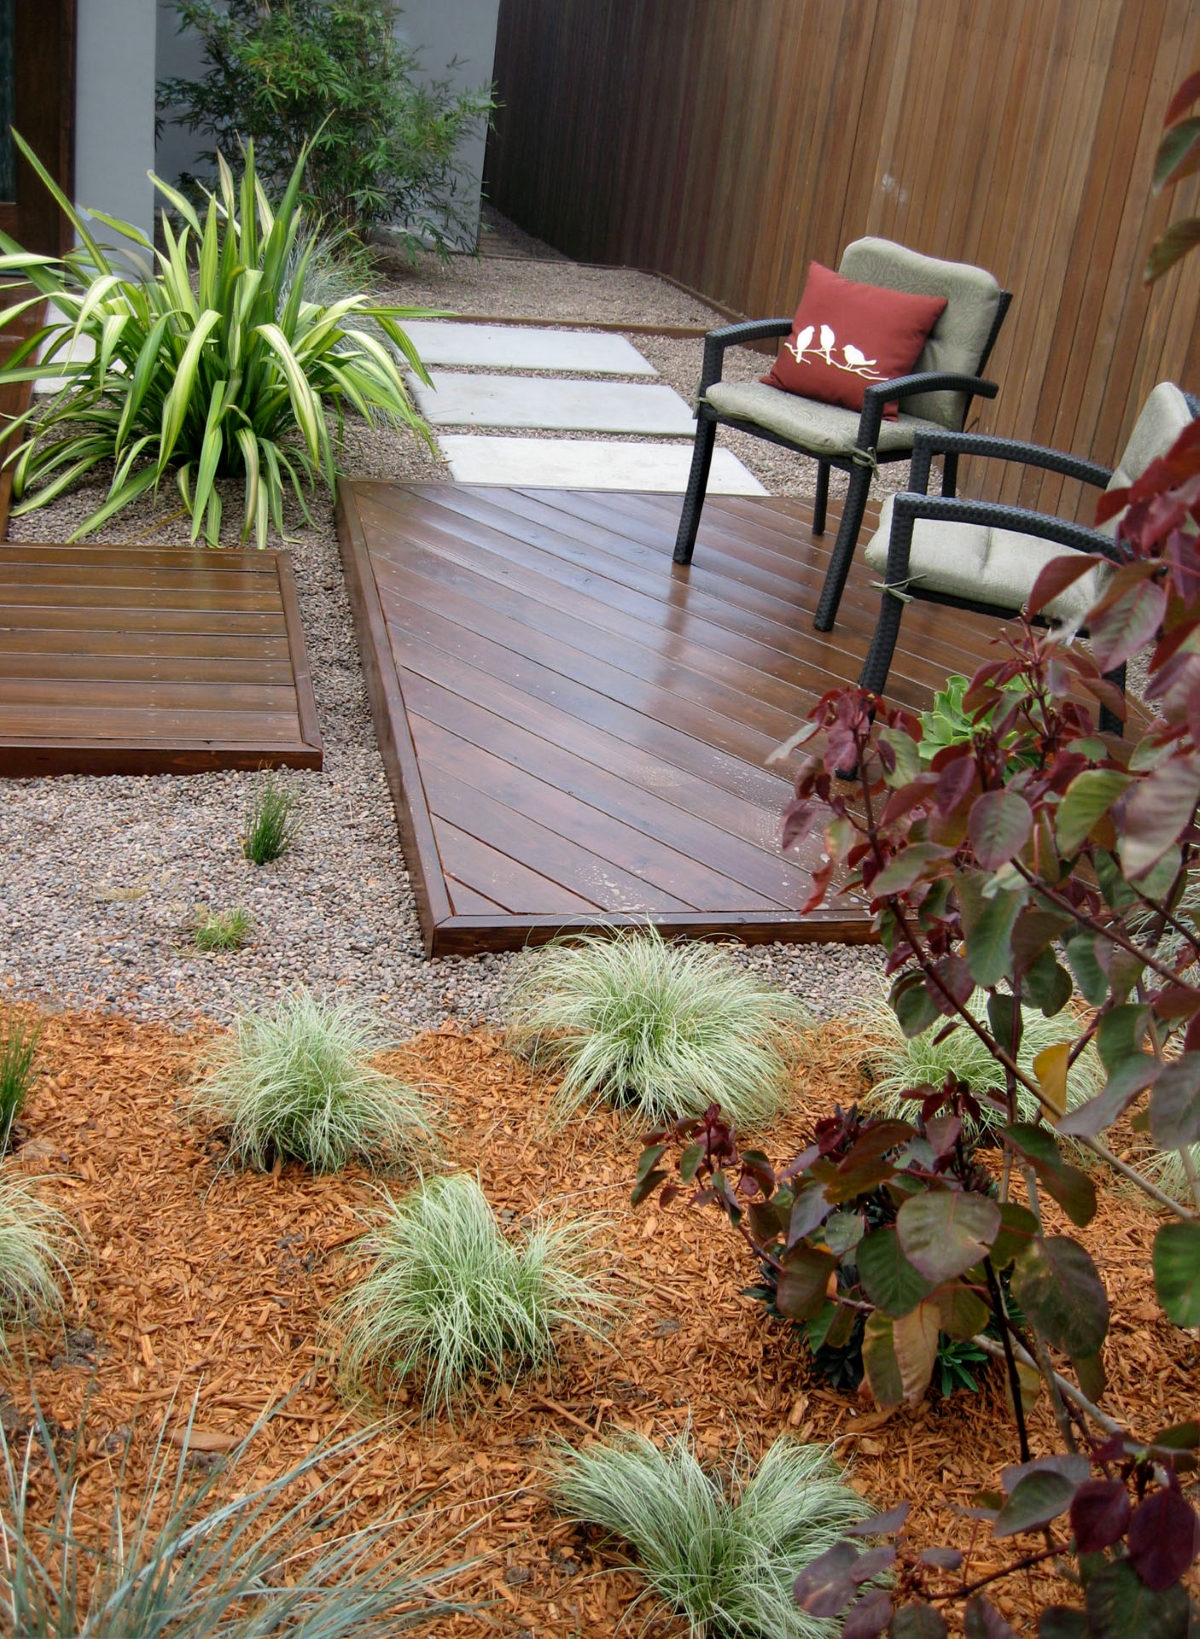 Small wooden patio outside